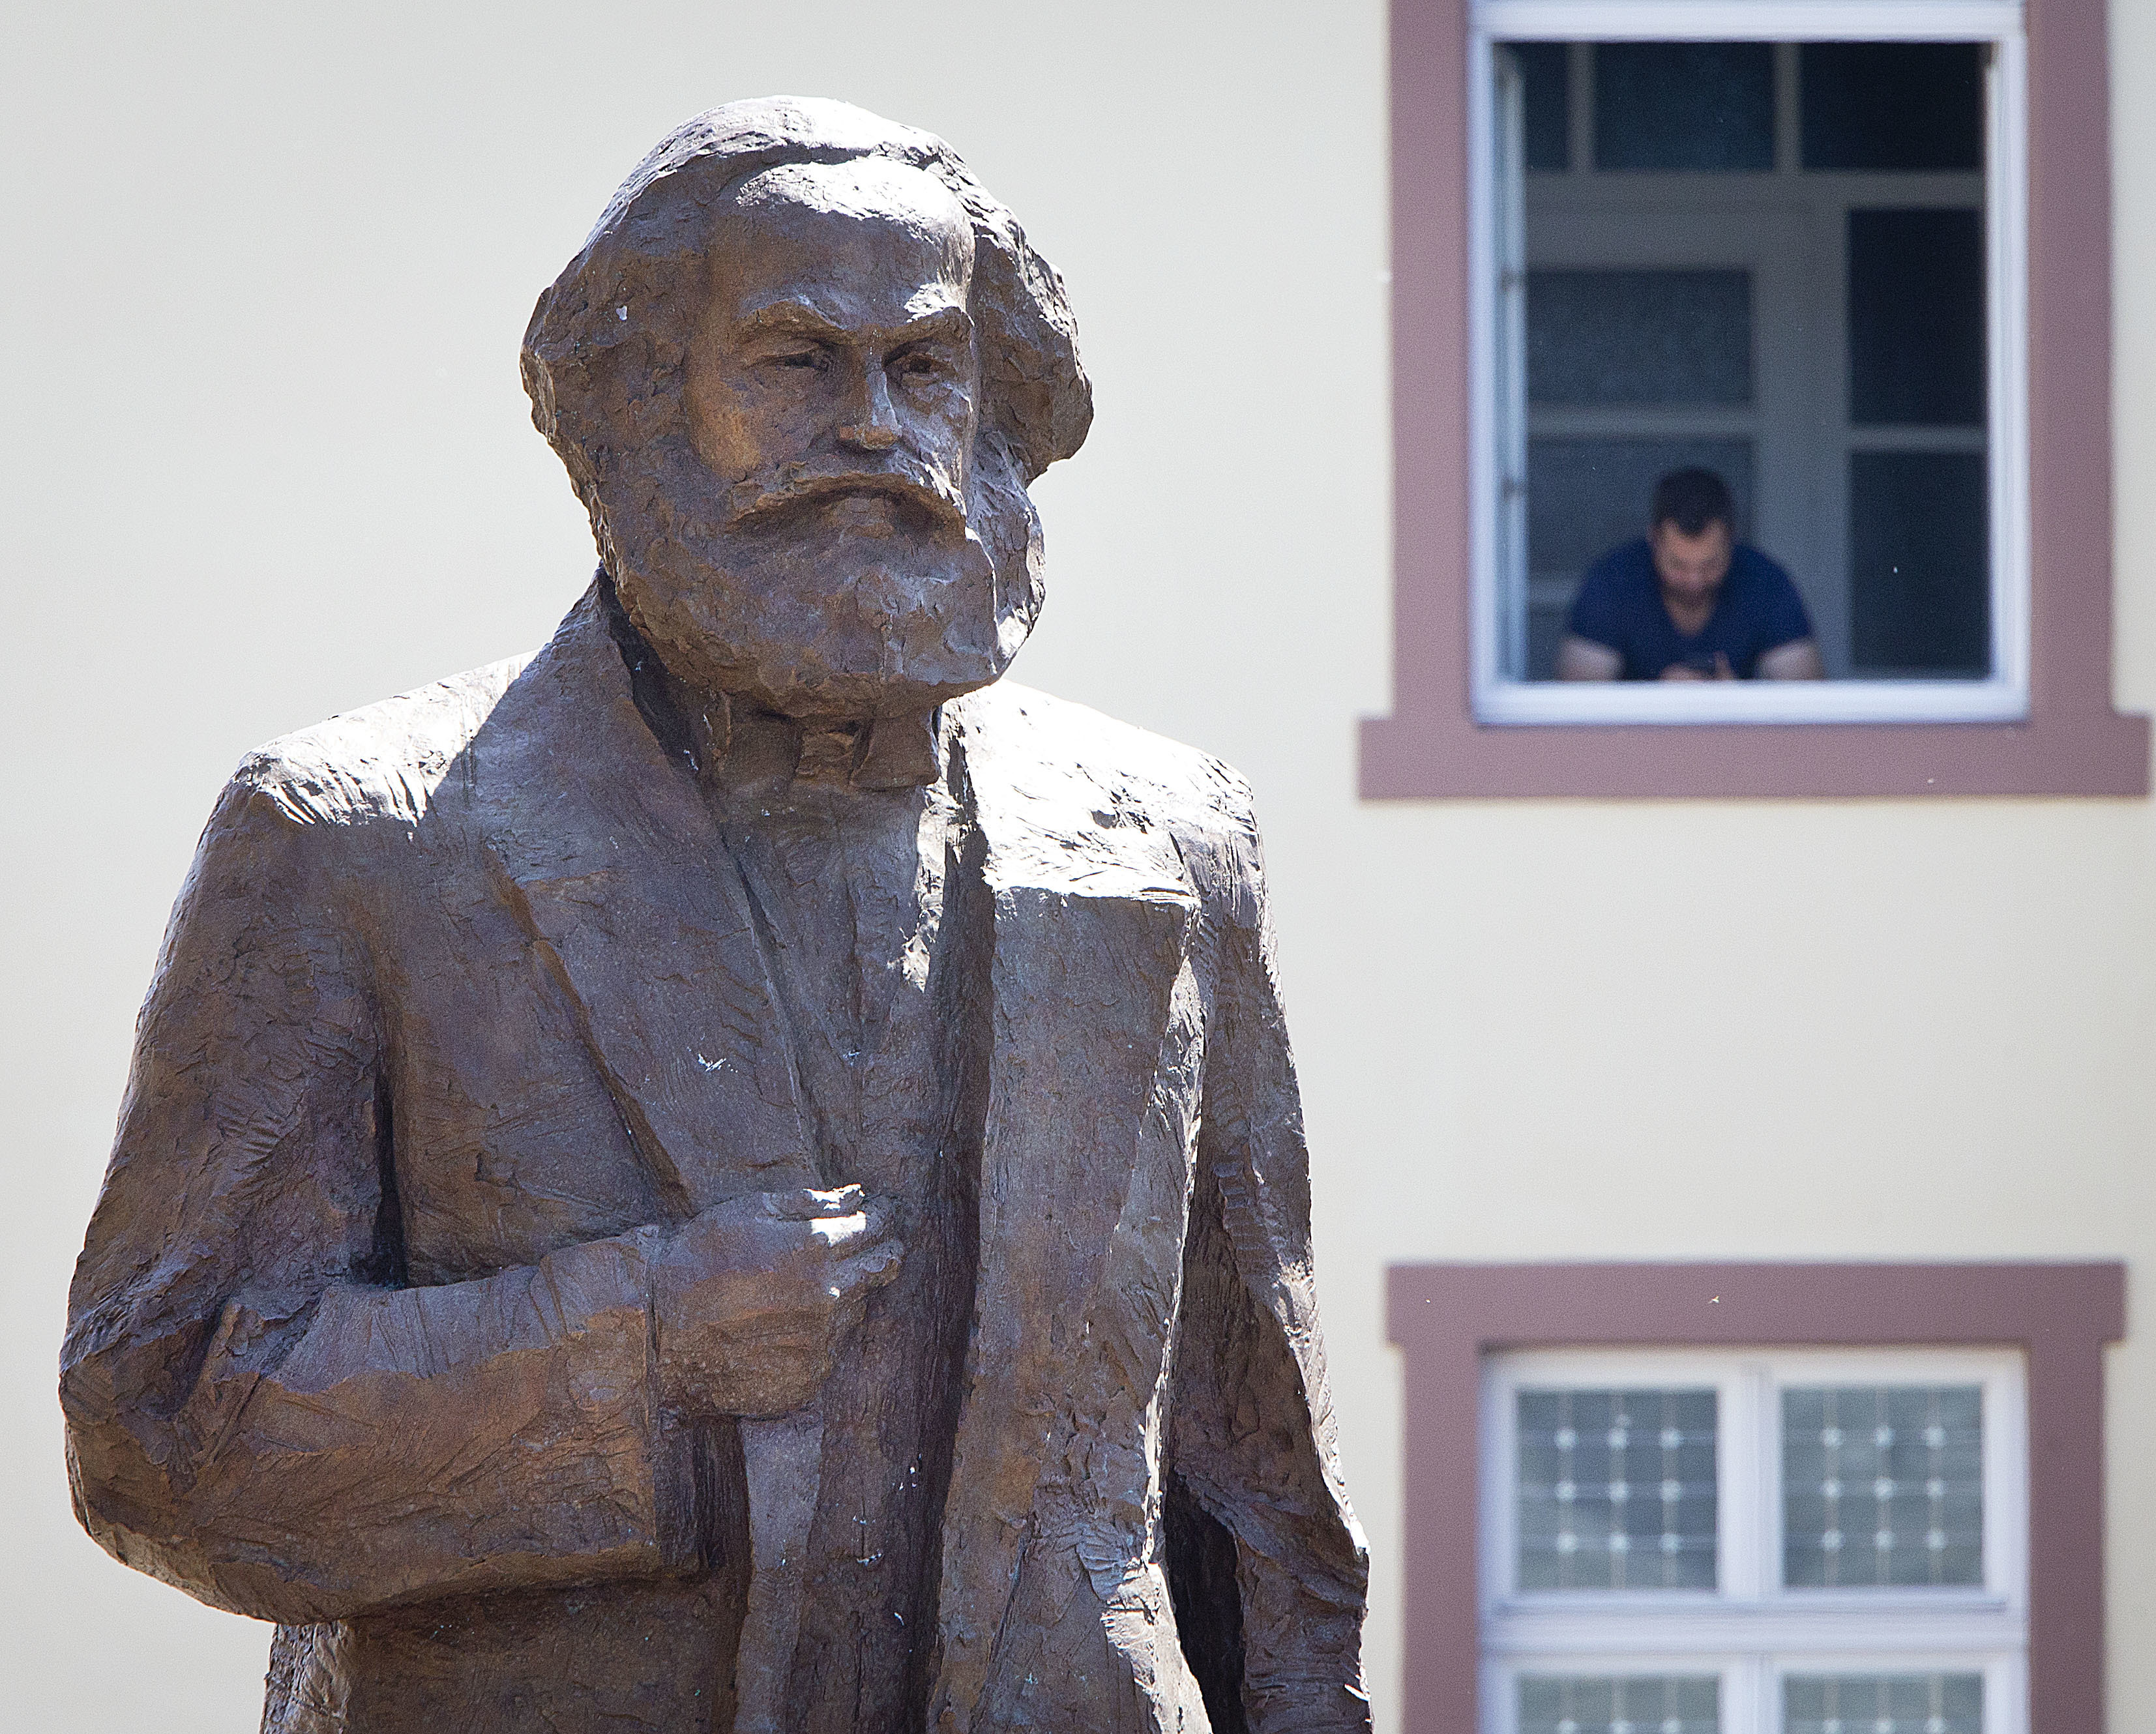 The bronze statue of Karl Marx in Trier, Germany (Michael Probst/AP)